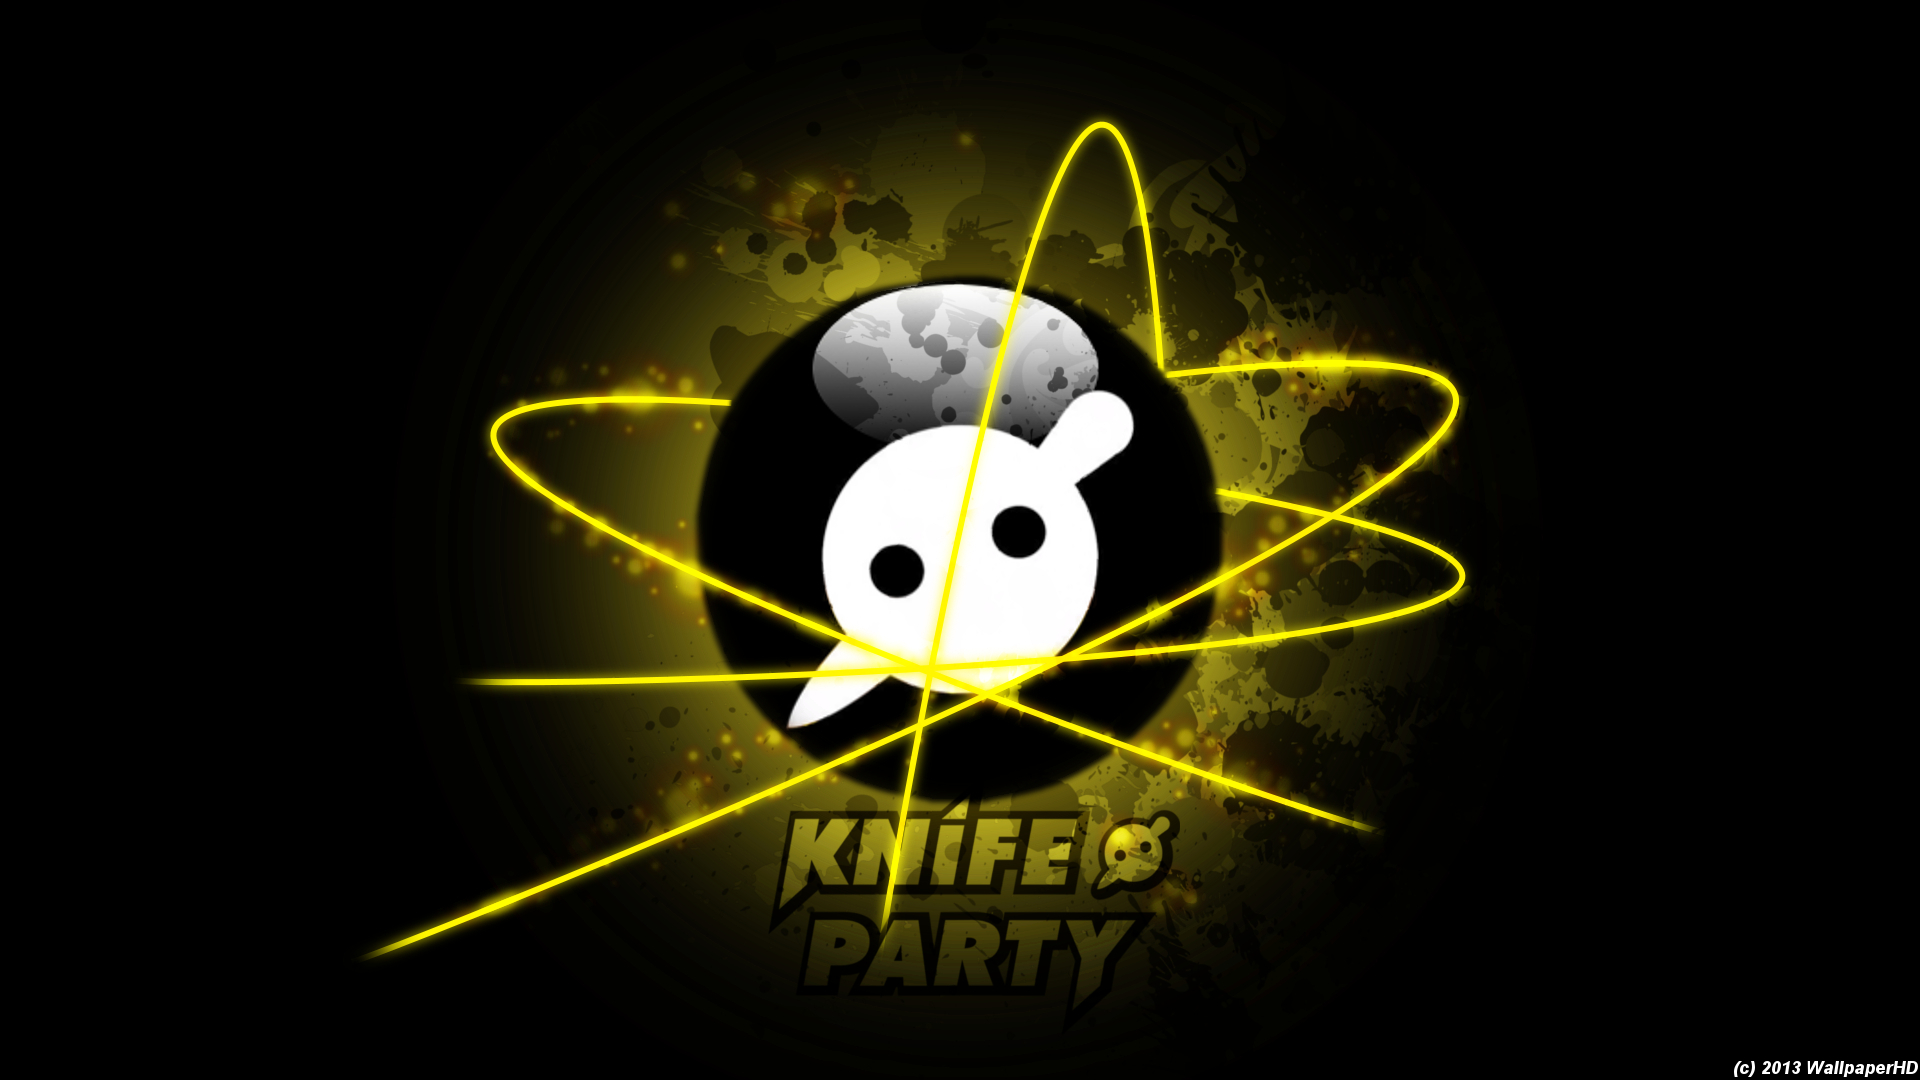 knife party wallpaper 1920x1080